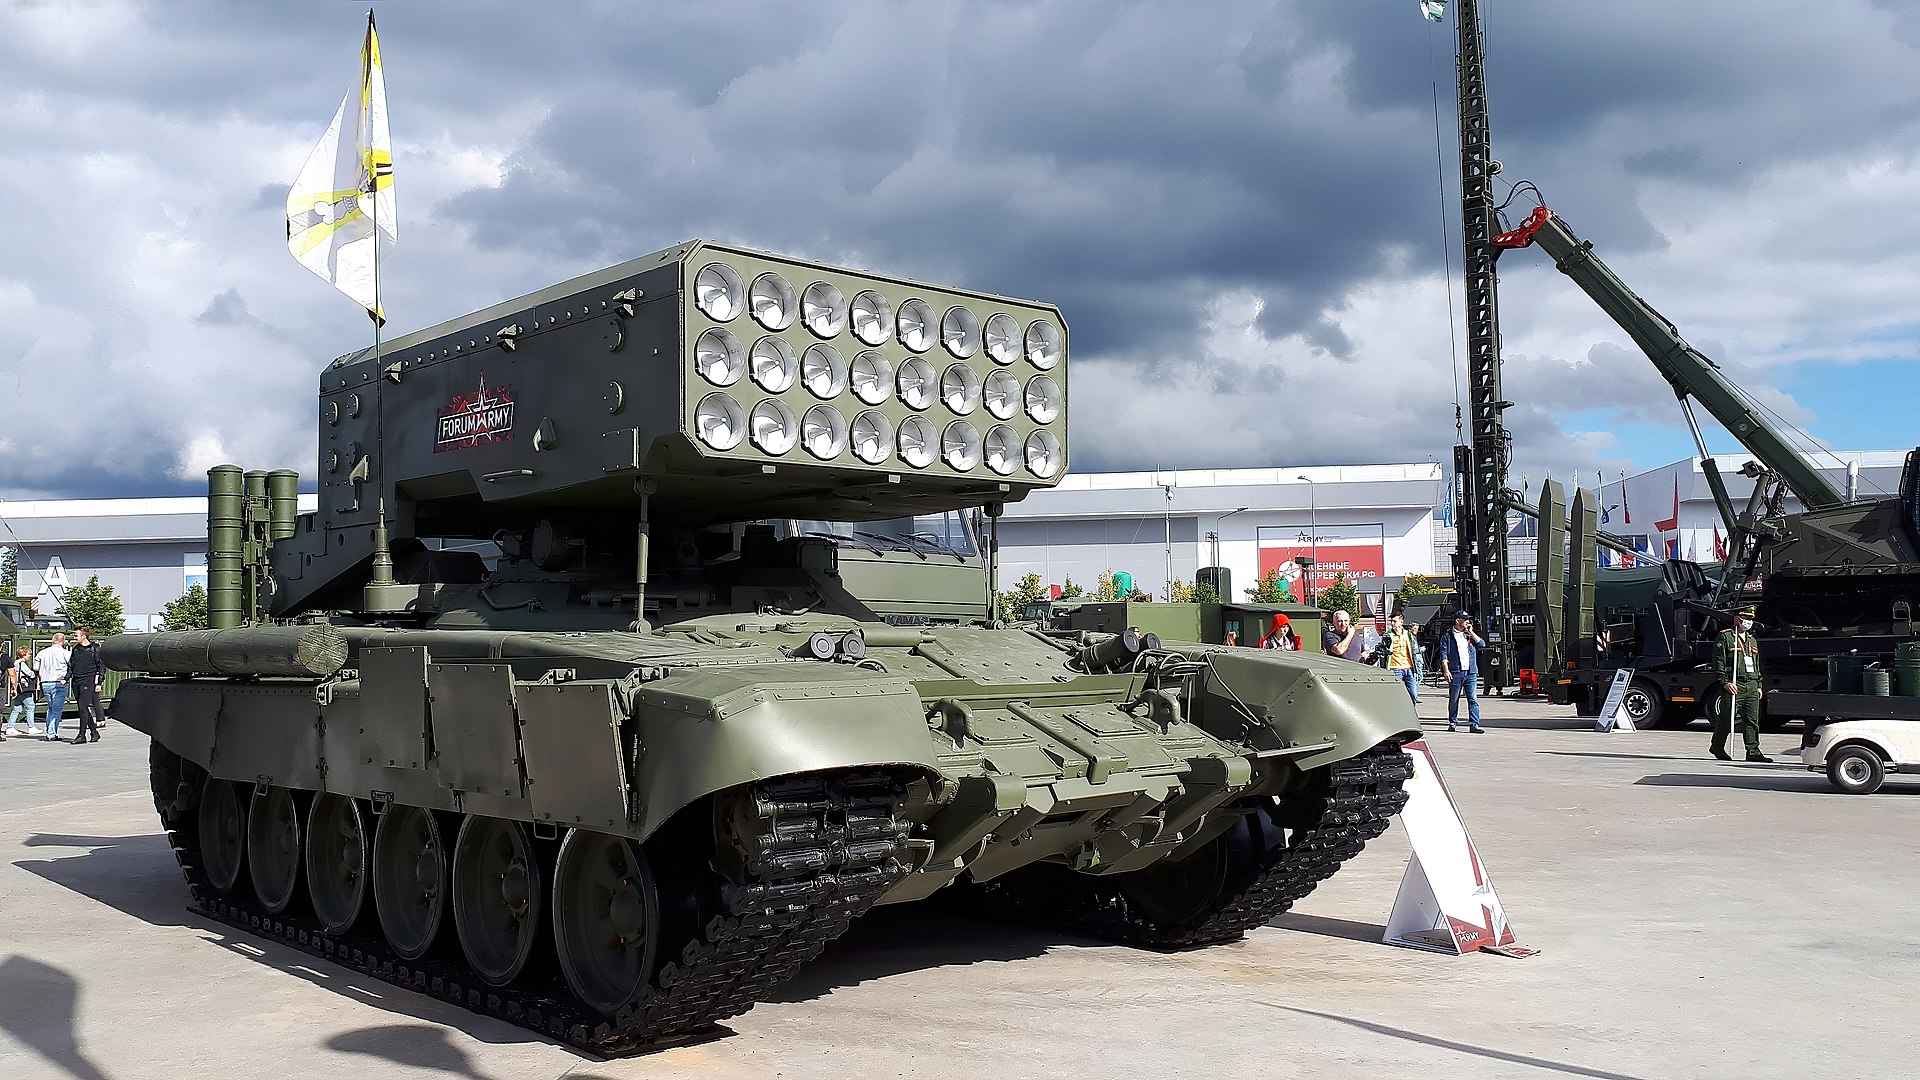 The AFU seized Russia's most powerful non-nuclear weapon, the TOS-1A Solntsepyok, with full ammunition